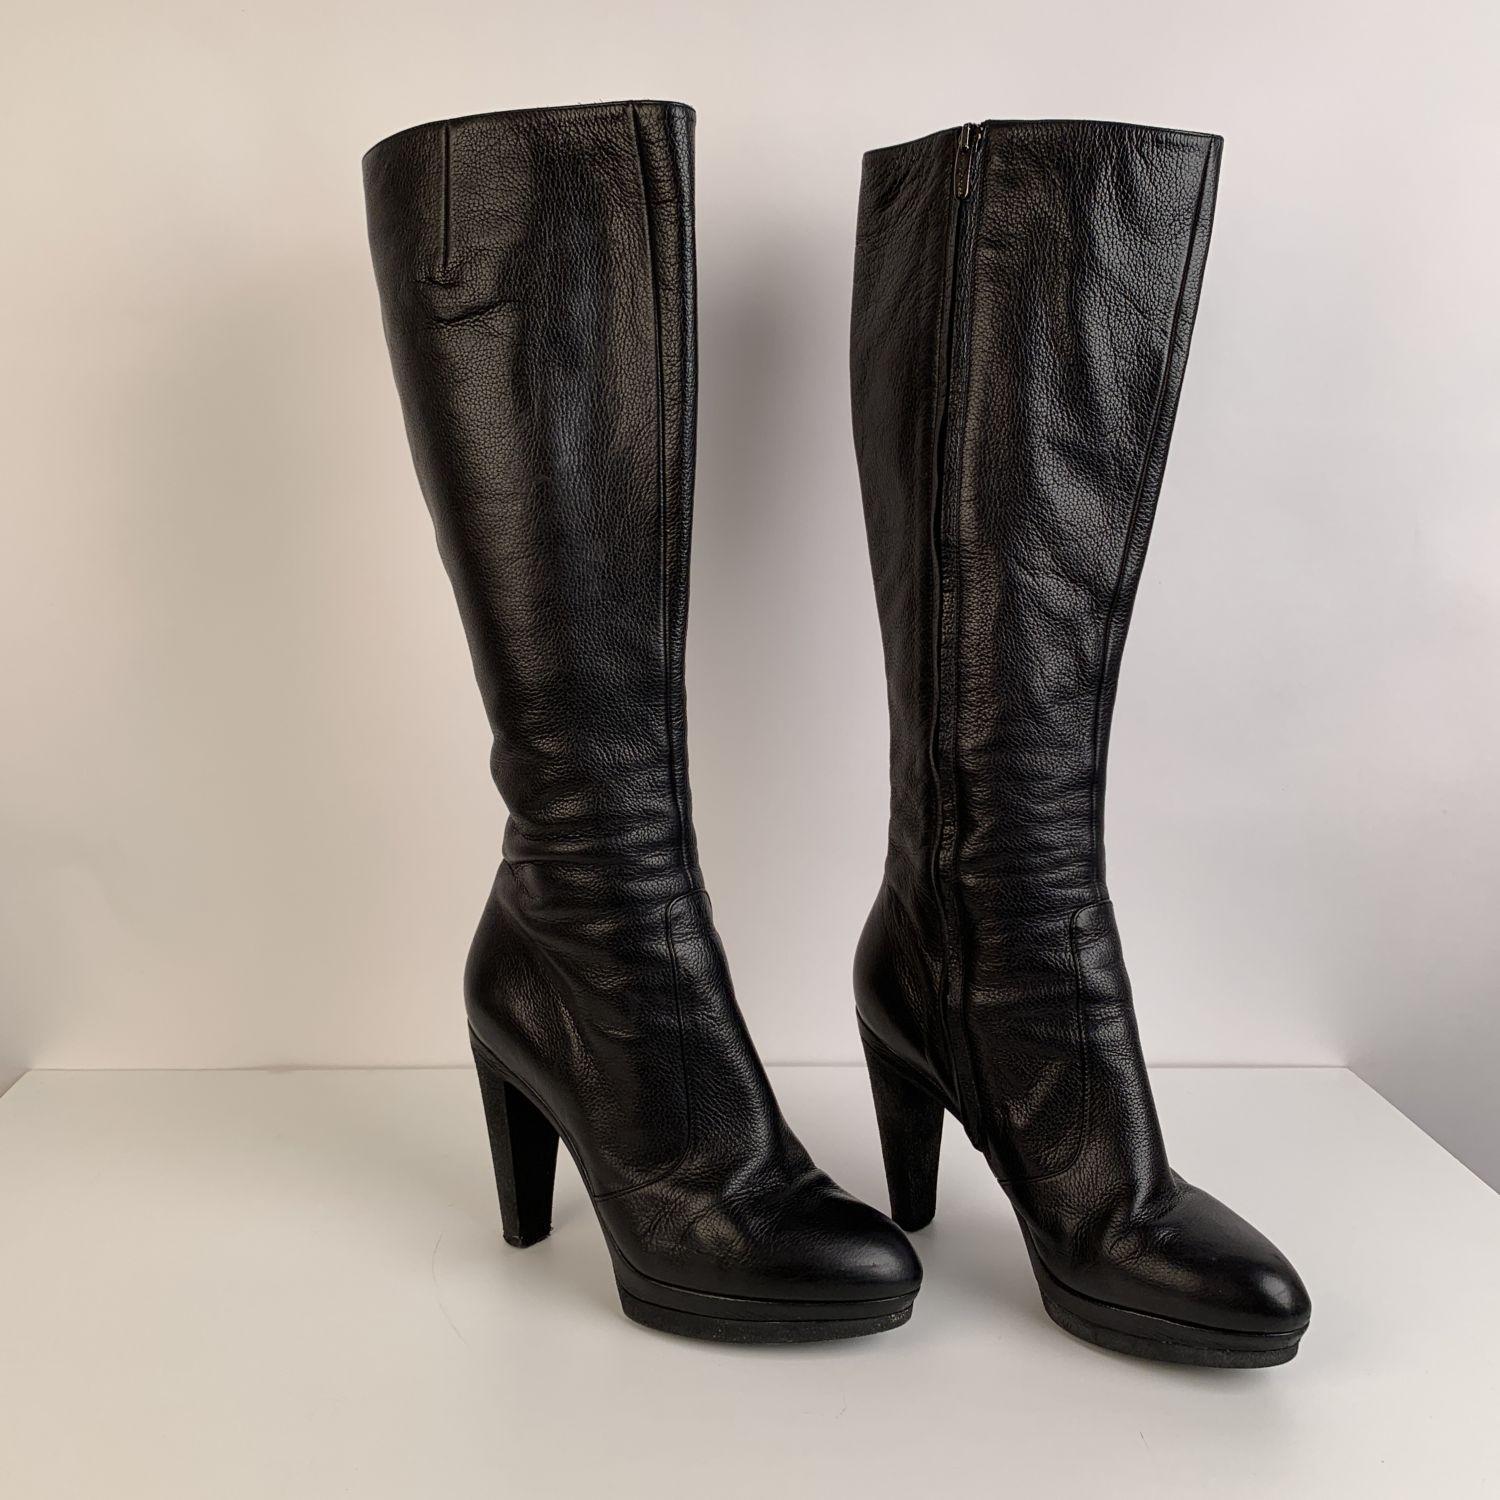 Women's Sergio Rossi Black Leather Heeled Boots Shoes Size 38.5